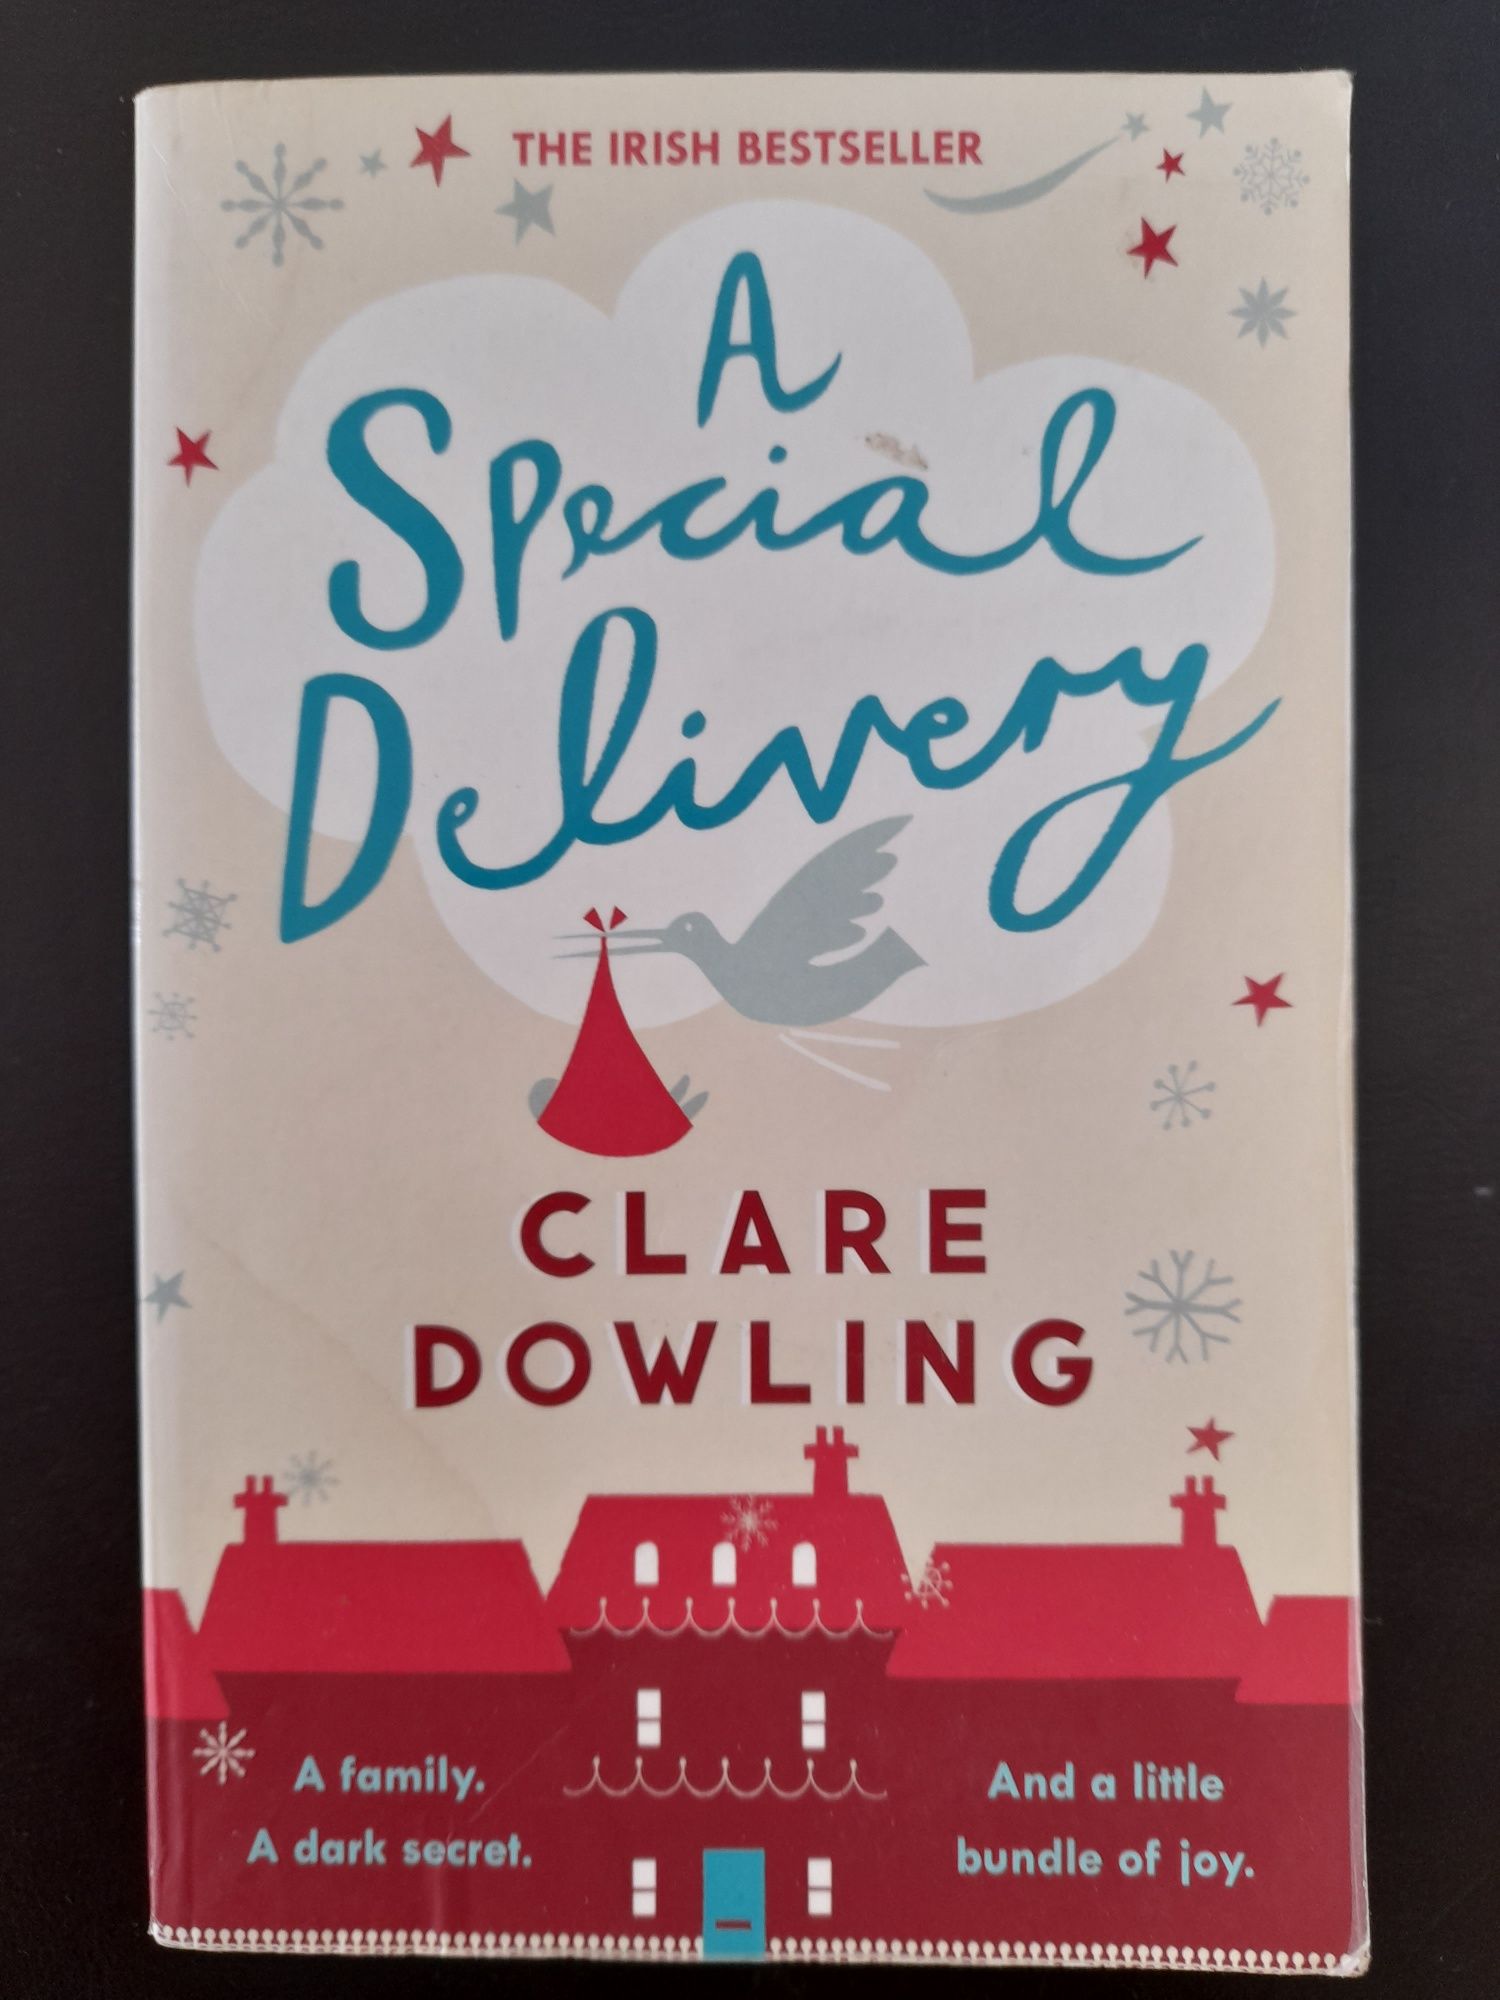 Clare Dowling, " A special delivery", 2014